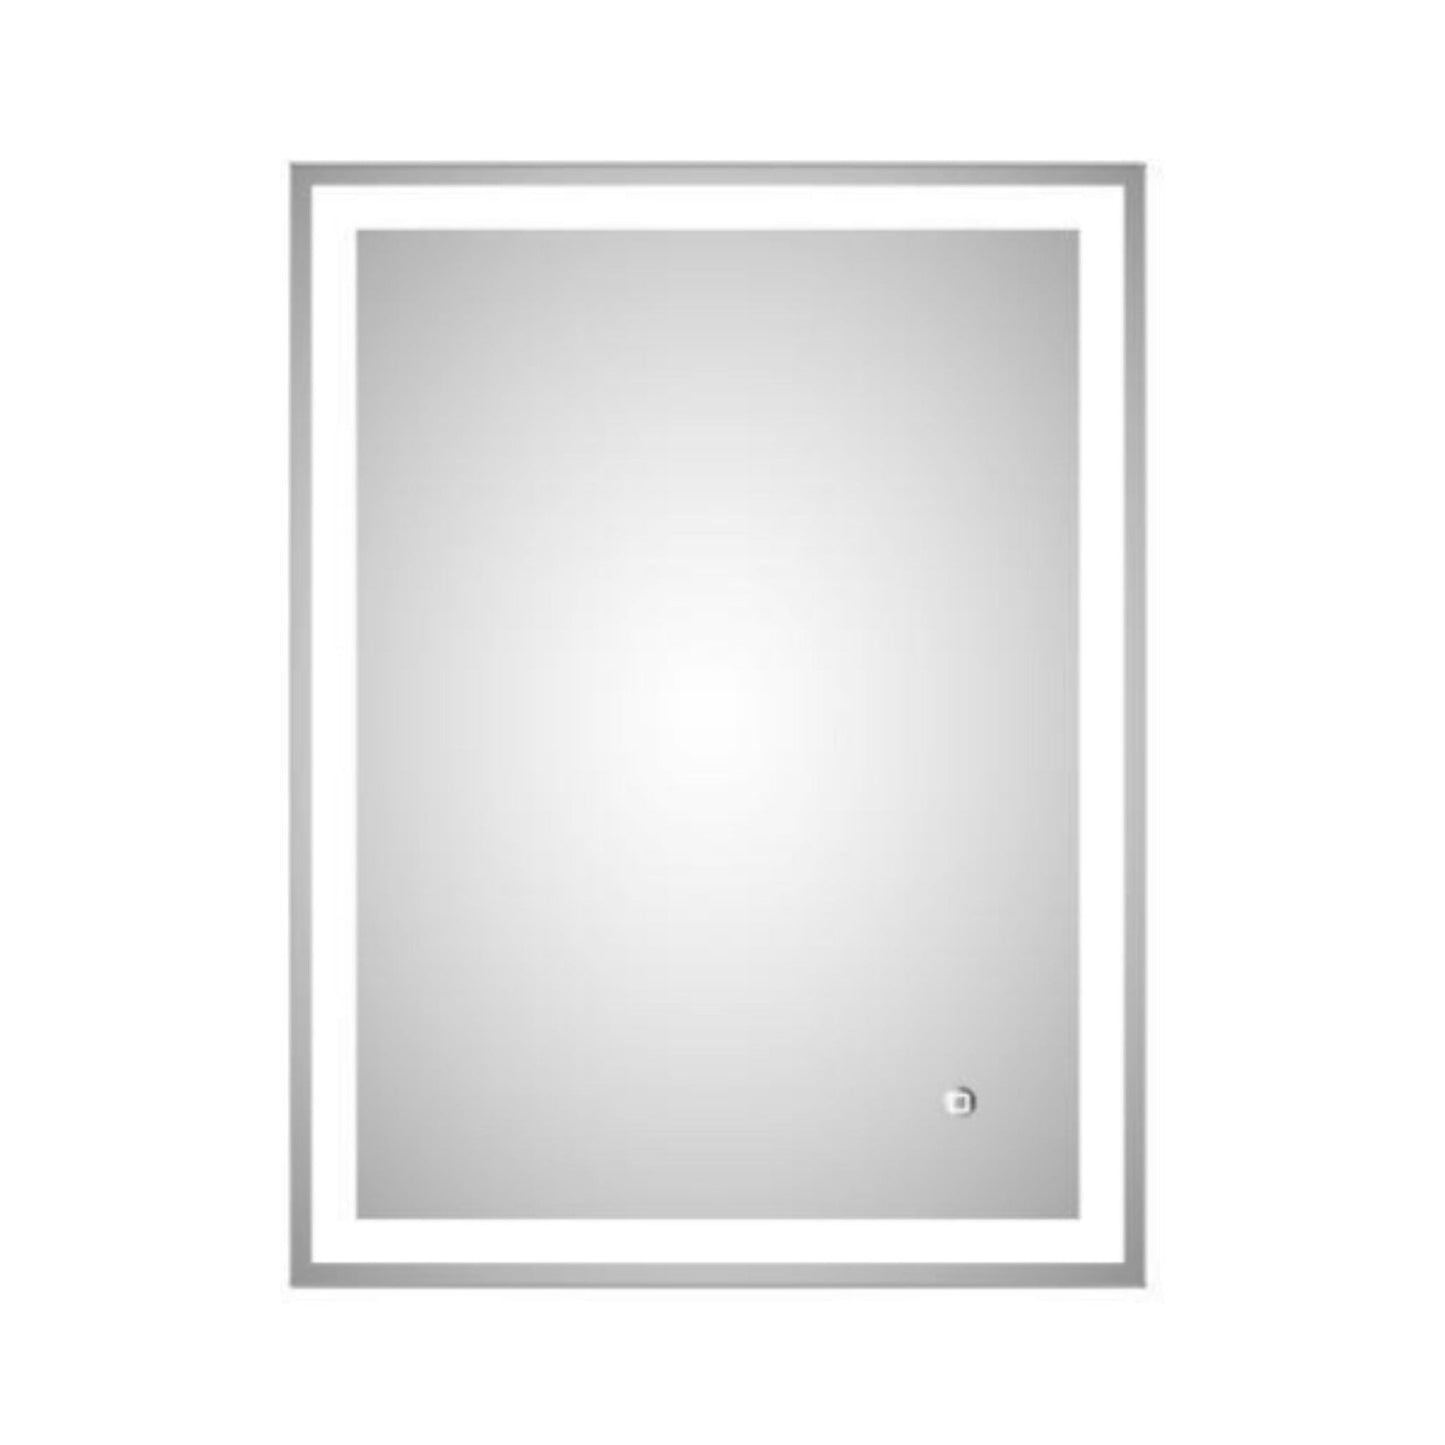 Duko Aurora 24" x 30" Bathroom Vanity LED Mirror With Touch Switch and Demister